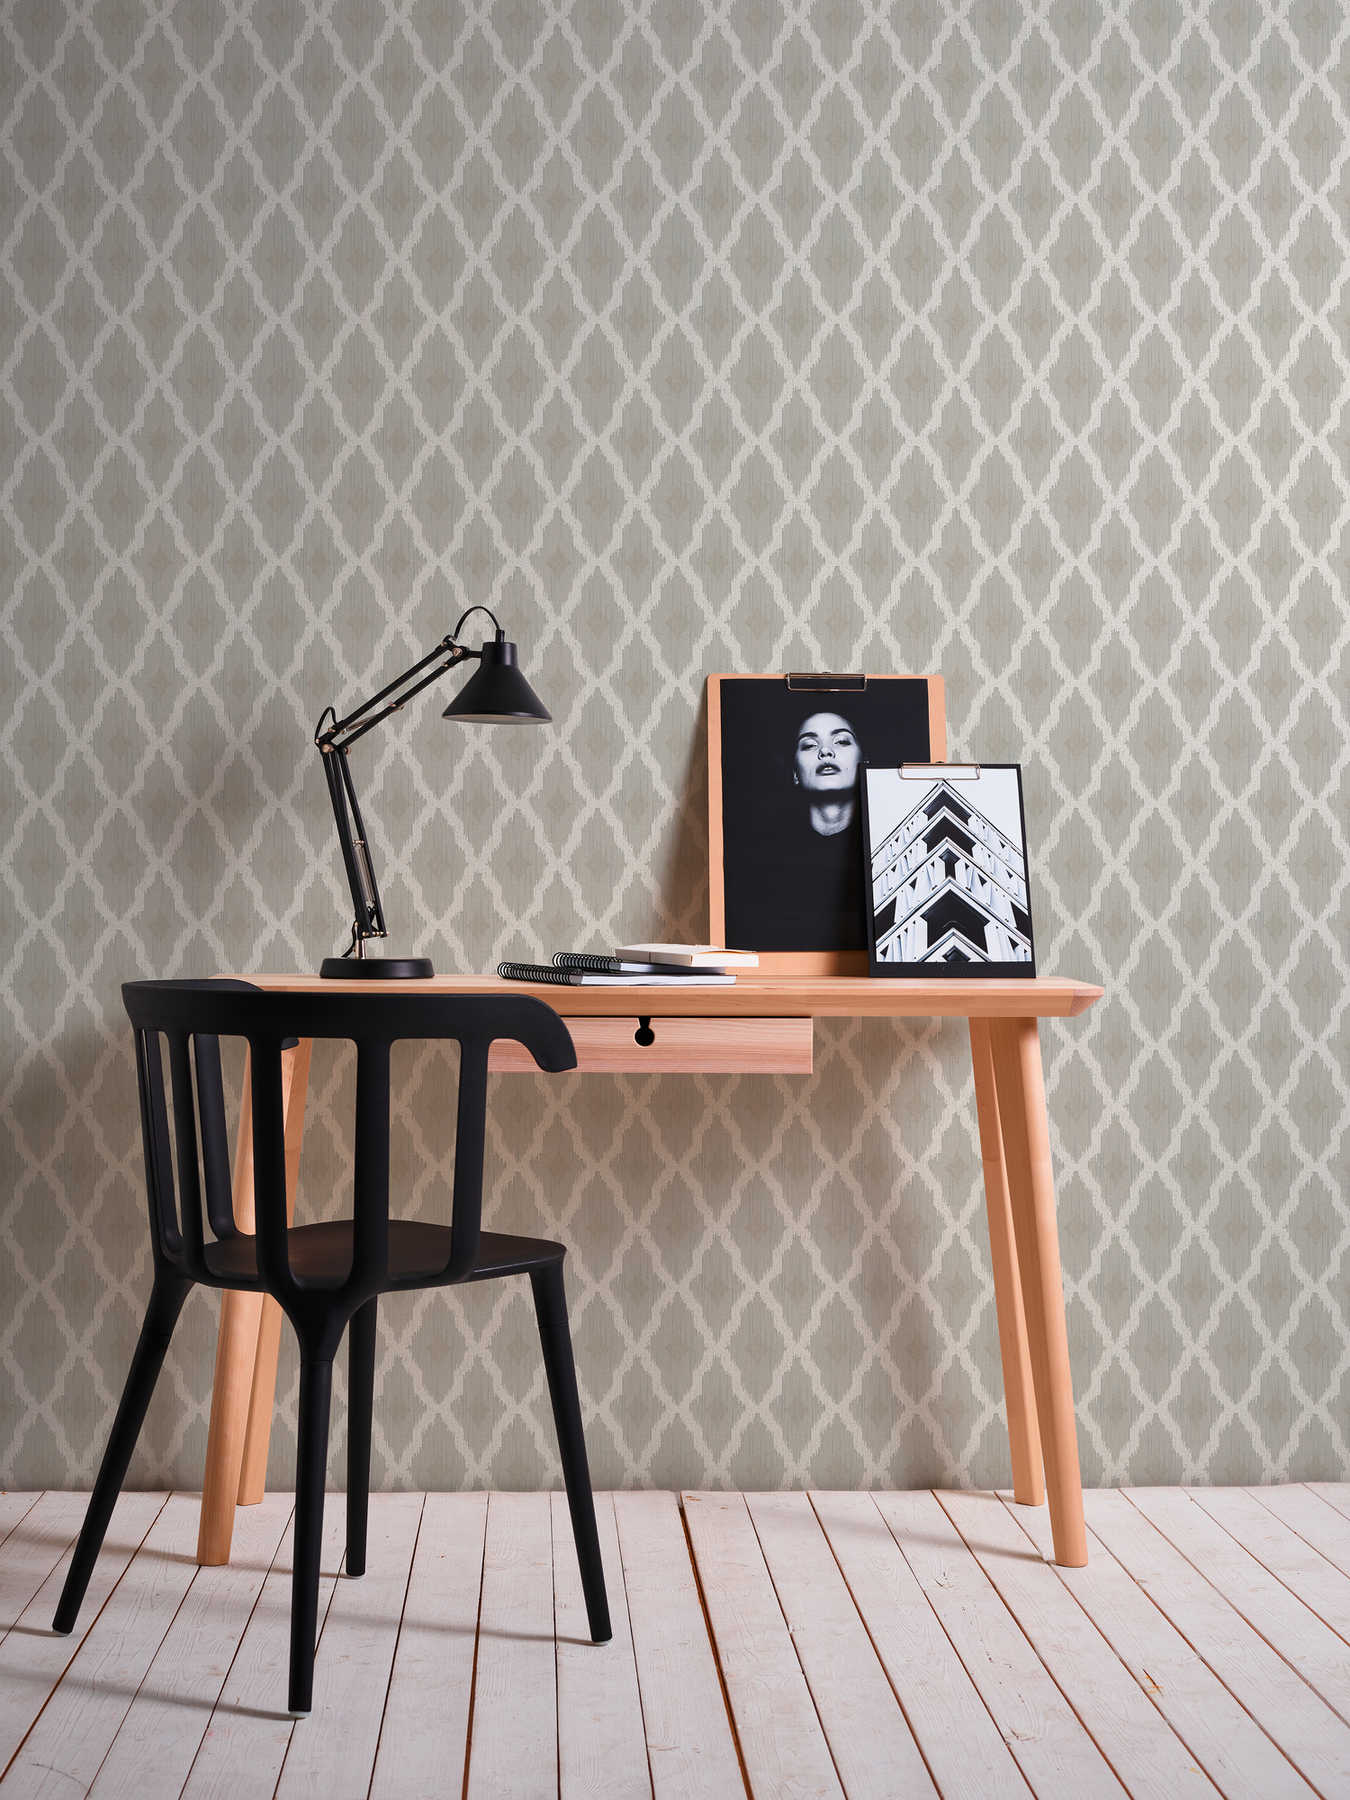             Grey non-woven wallpaper with curved diamond pattern
        